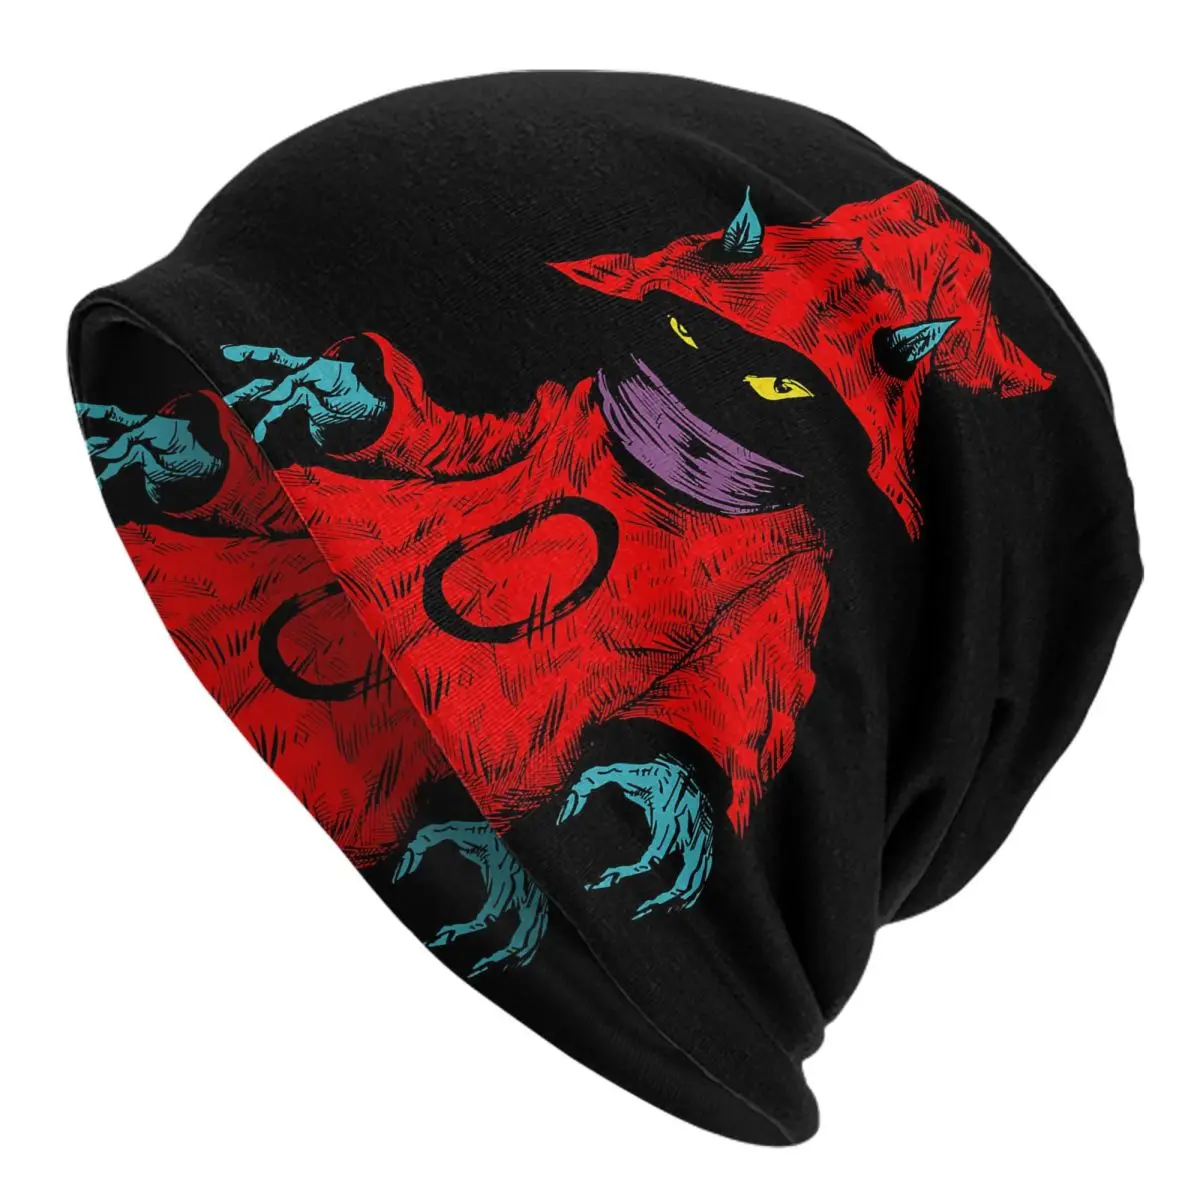 Masters Of The Universe - Orko Adult Men's Women's Knit Hat Keep warm winter Funny knitted hat